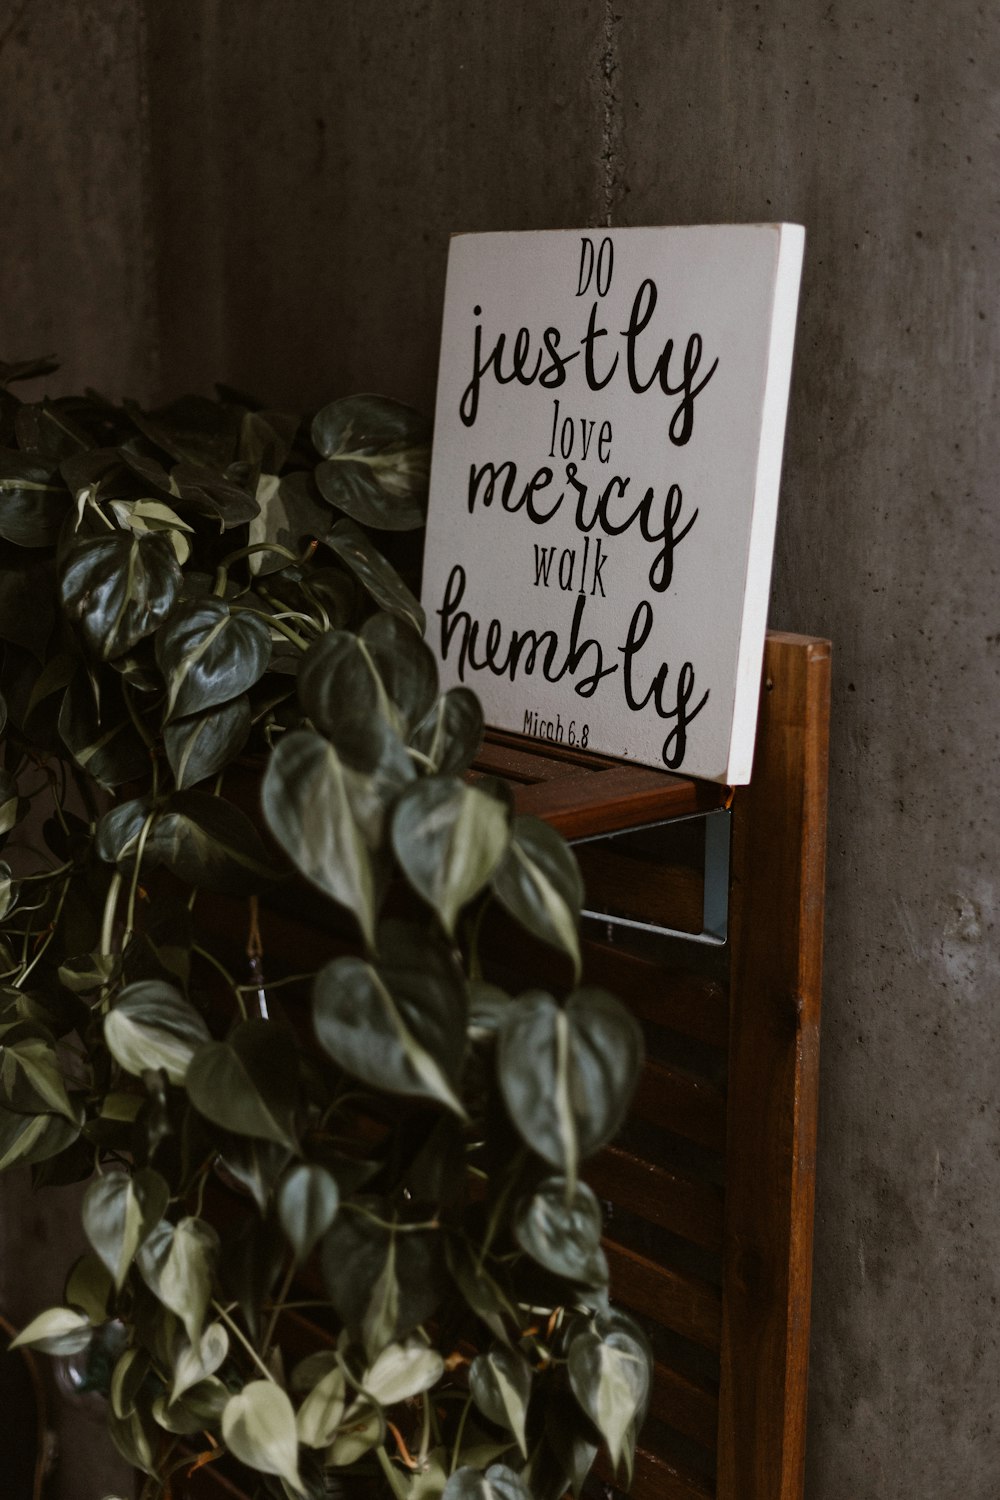 do justly love mercy walk humbly signage leaning on wall beside plants